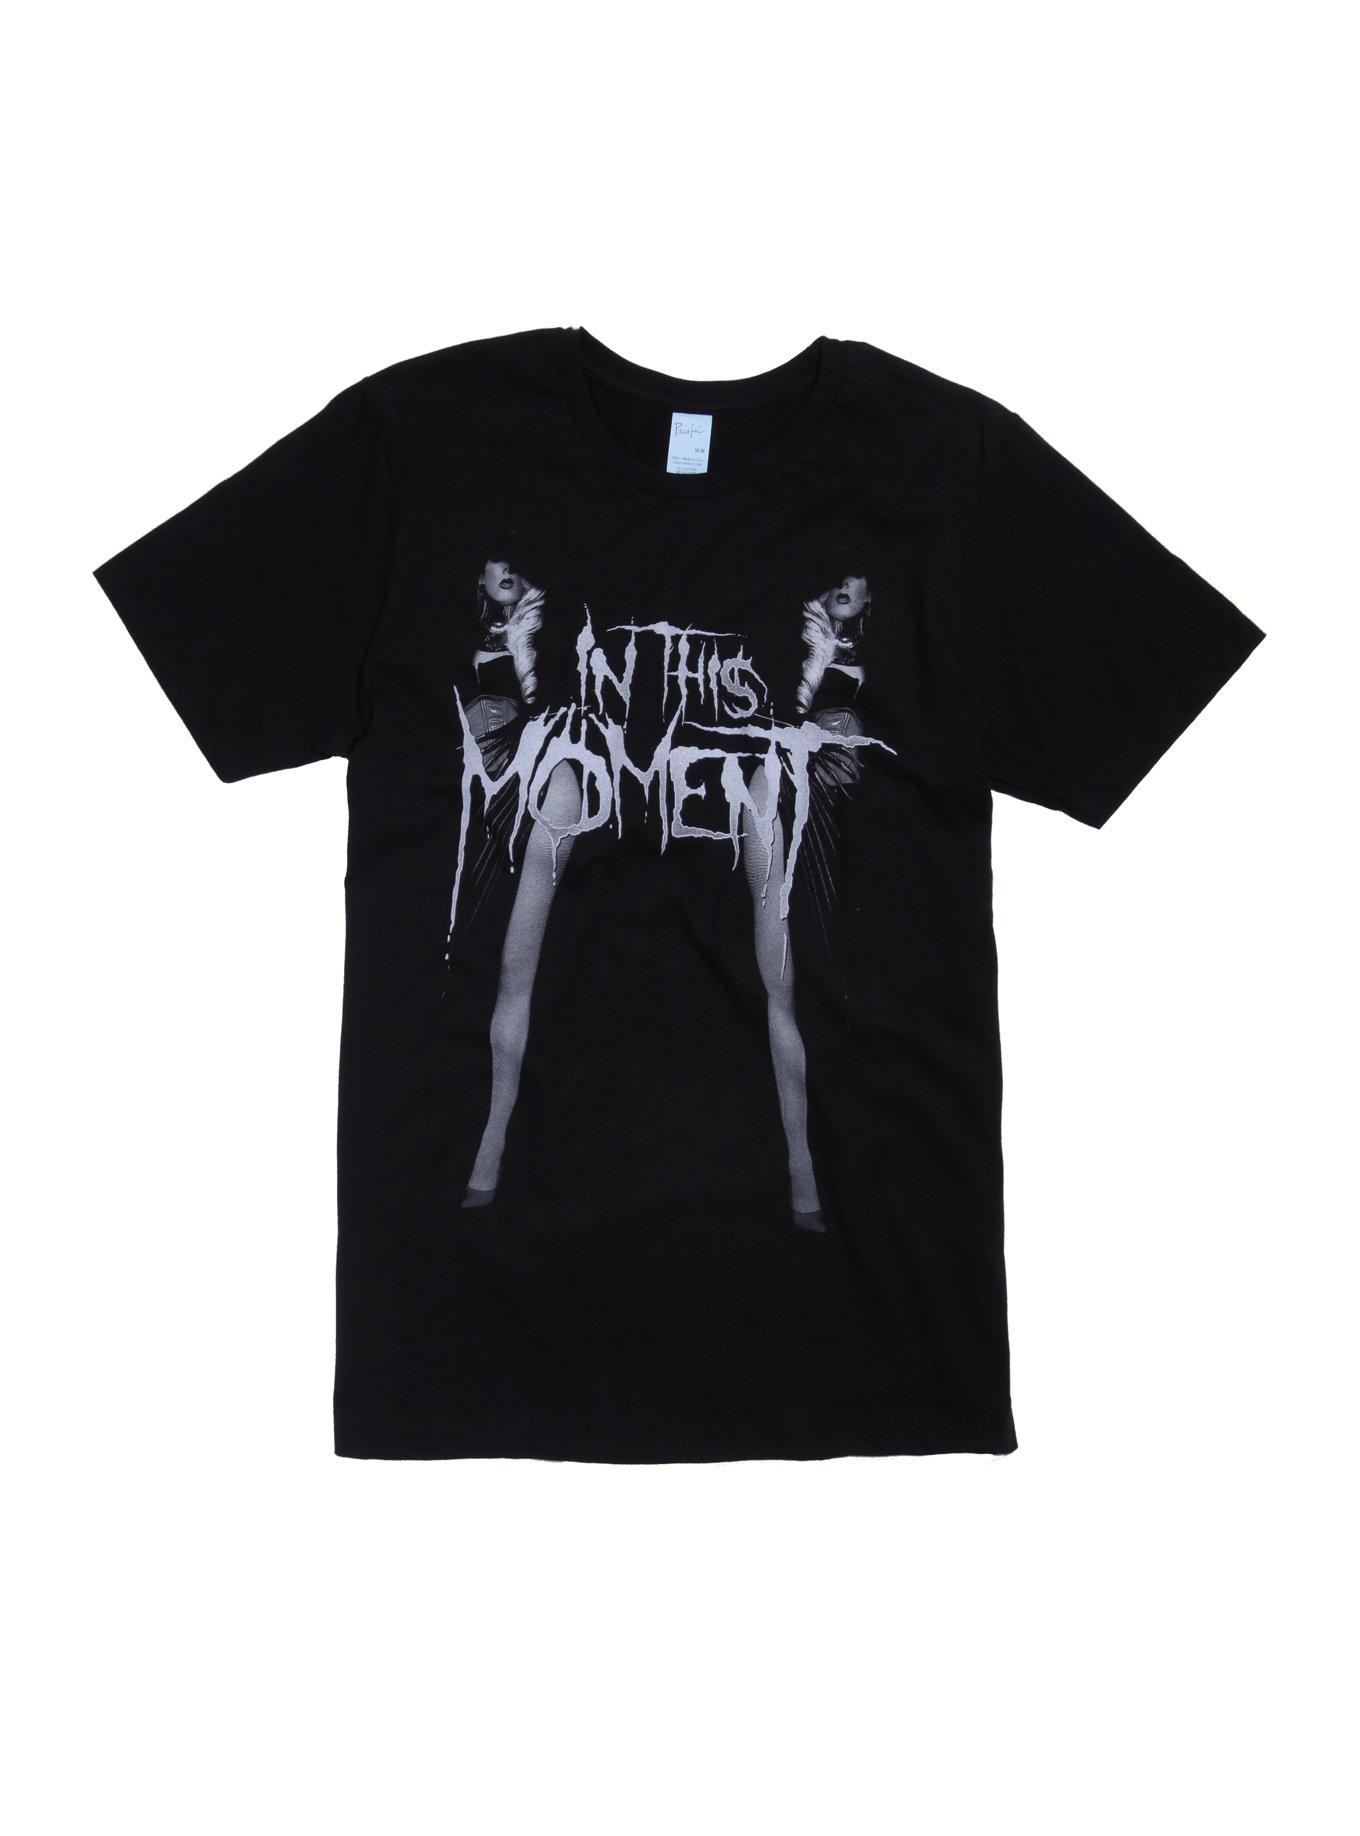 In This Moment Black Widow Leg Mirrored T-Shirt, BLACK, hi-res